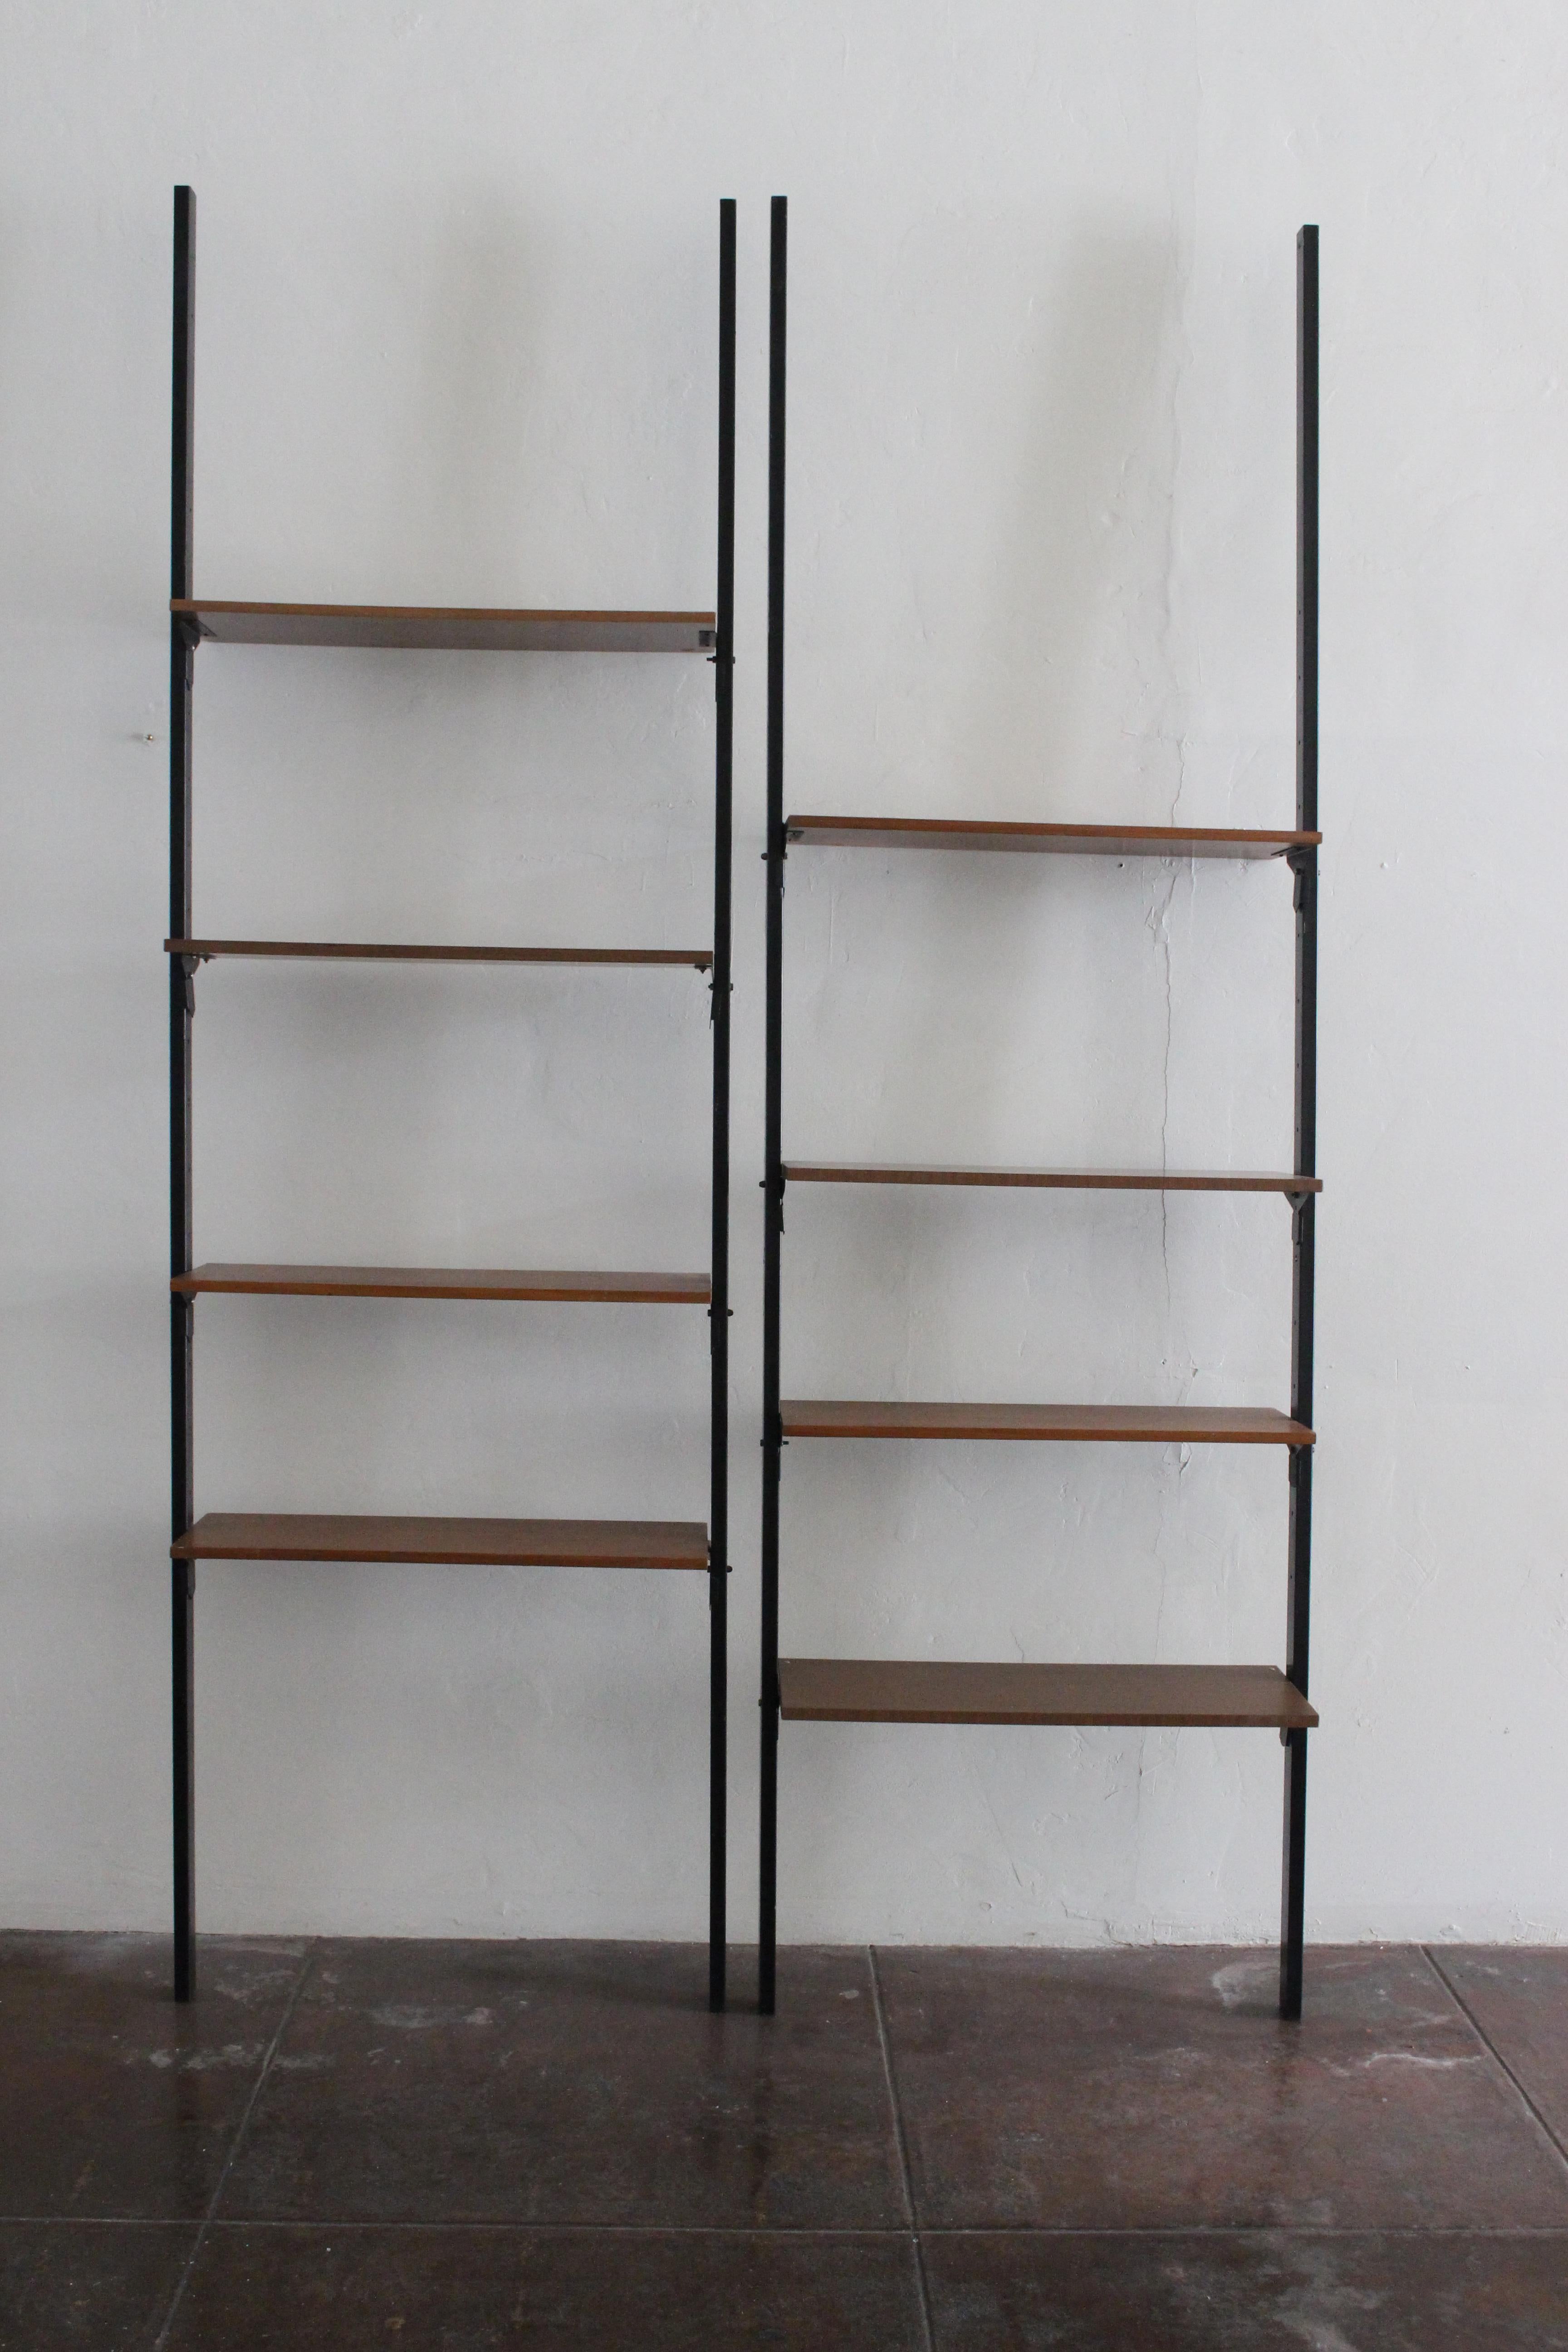 Tall midcentury metal shelves, adjustable shelving position
metal base with Formica veneer. The shelves can be disassemble as shown on the photos all of them are on the screws.When shipping we have to dismantle it.
Shipping to US continental in home